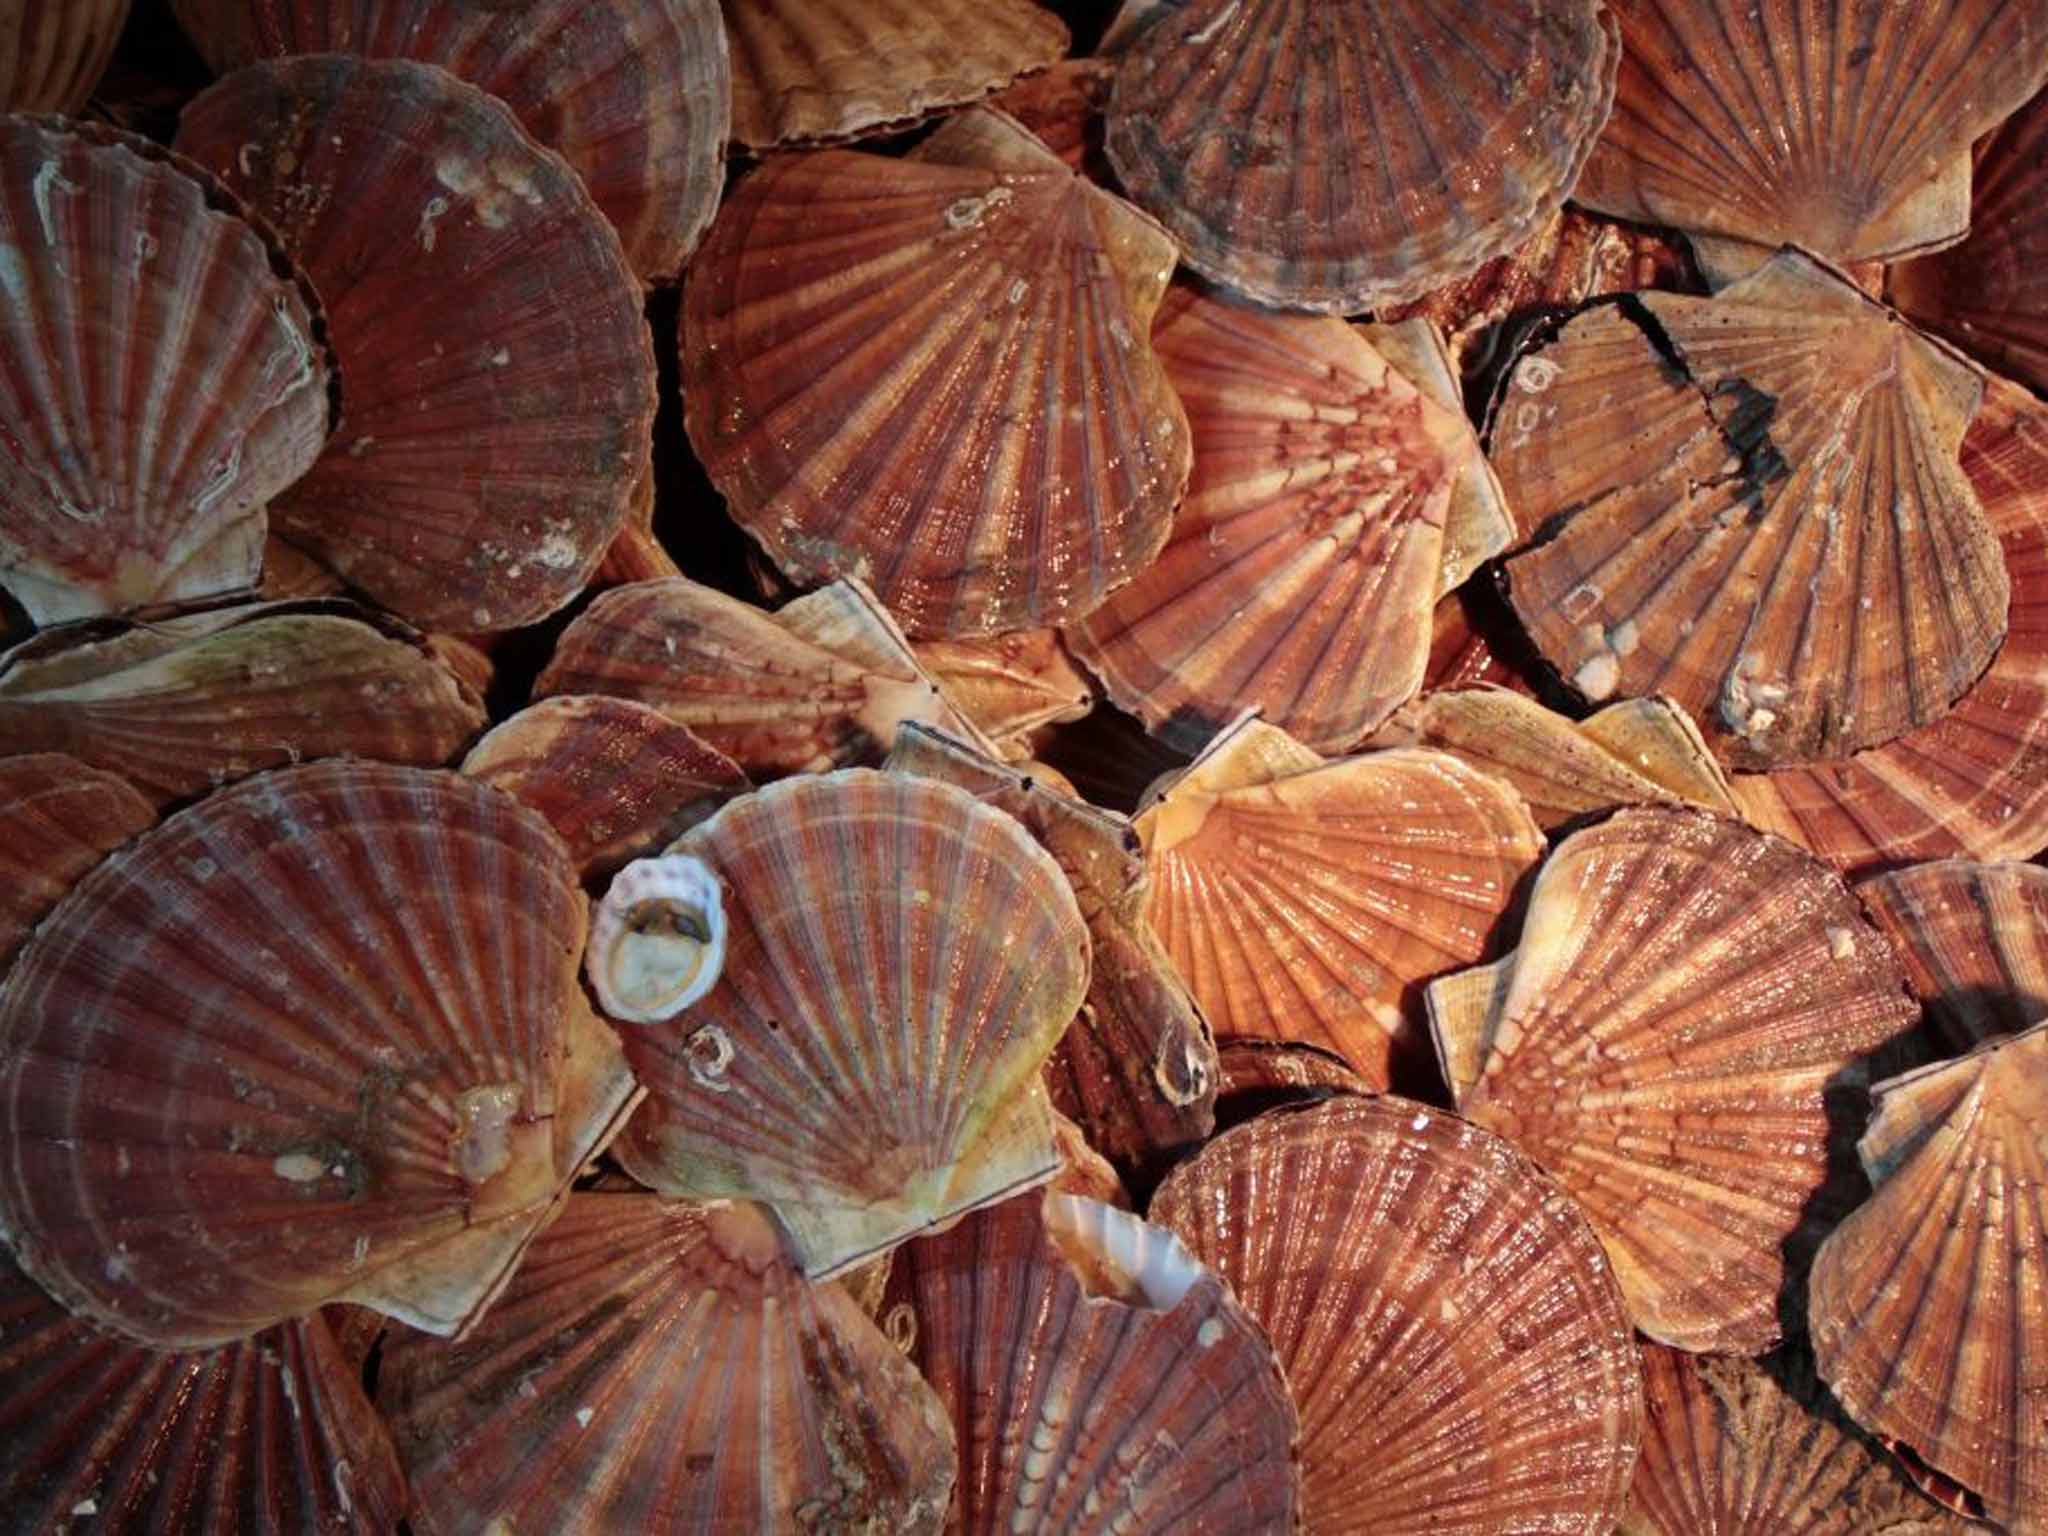 Our taste for scallops has been steadily increasing over the past decade